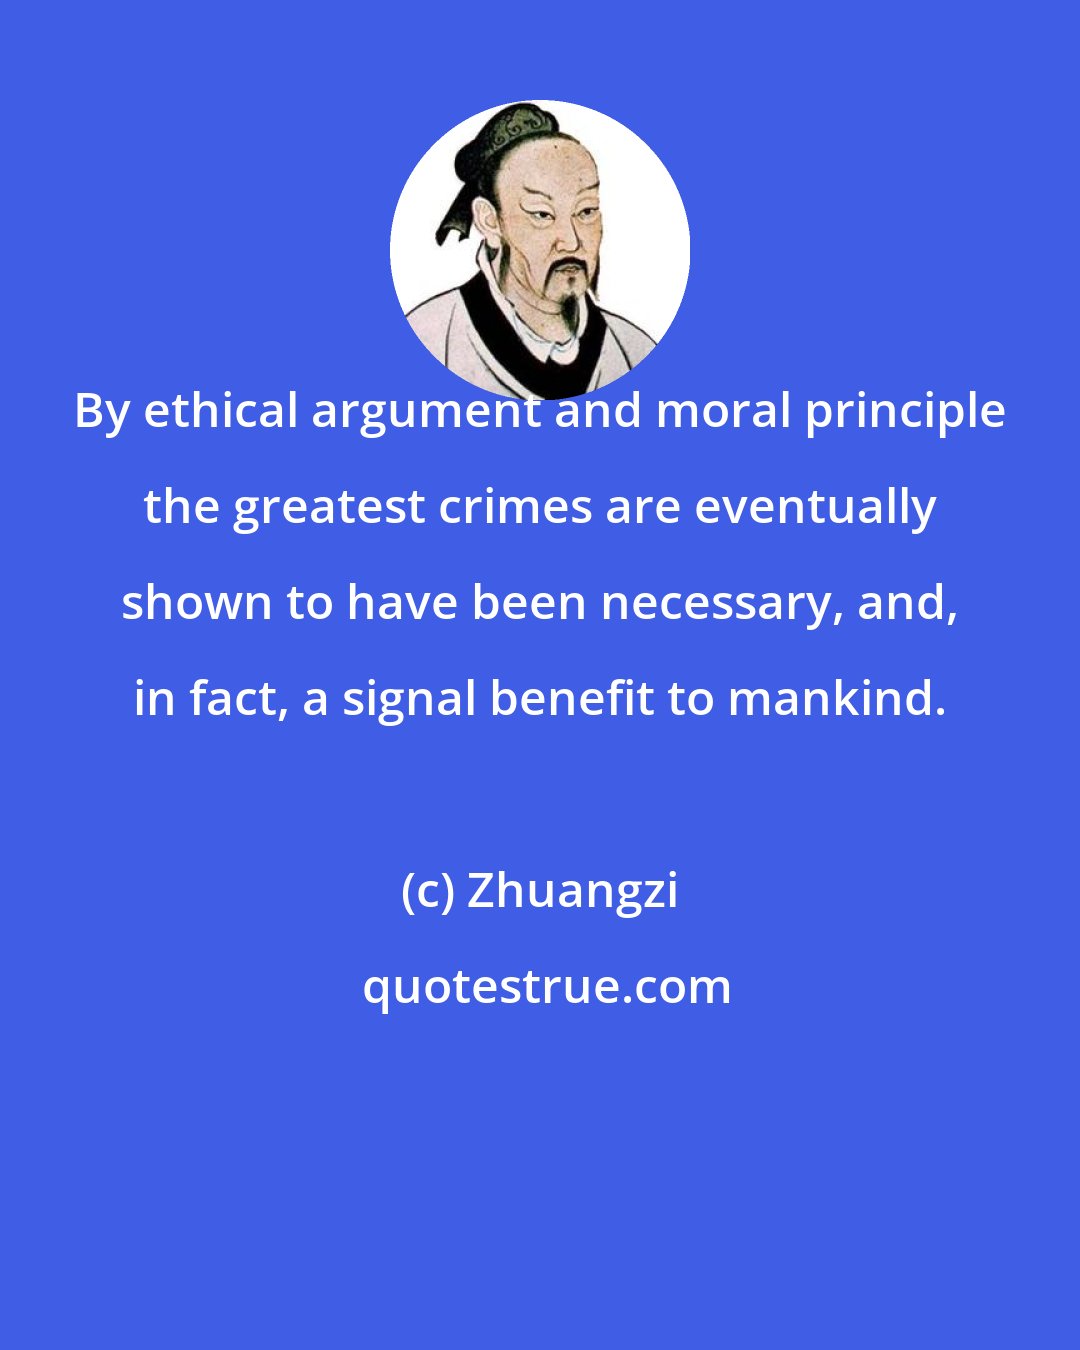 Zhuangzi: By ethical argument and moral principle the greatest crimes are eventually shown to have been necessary, and, in fact, a signal benefit to mankind.